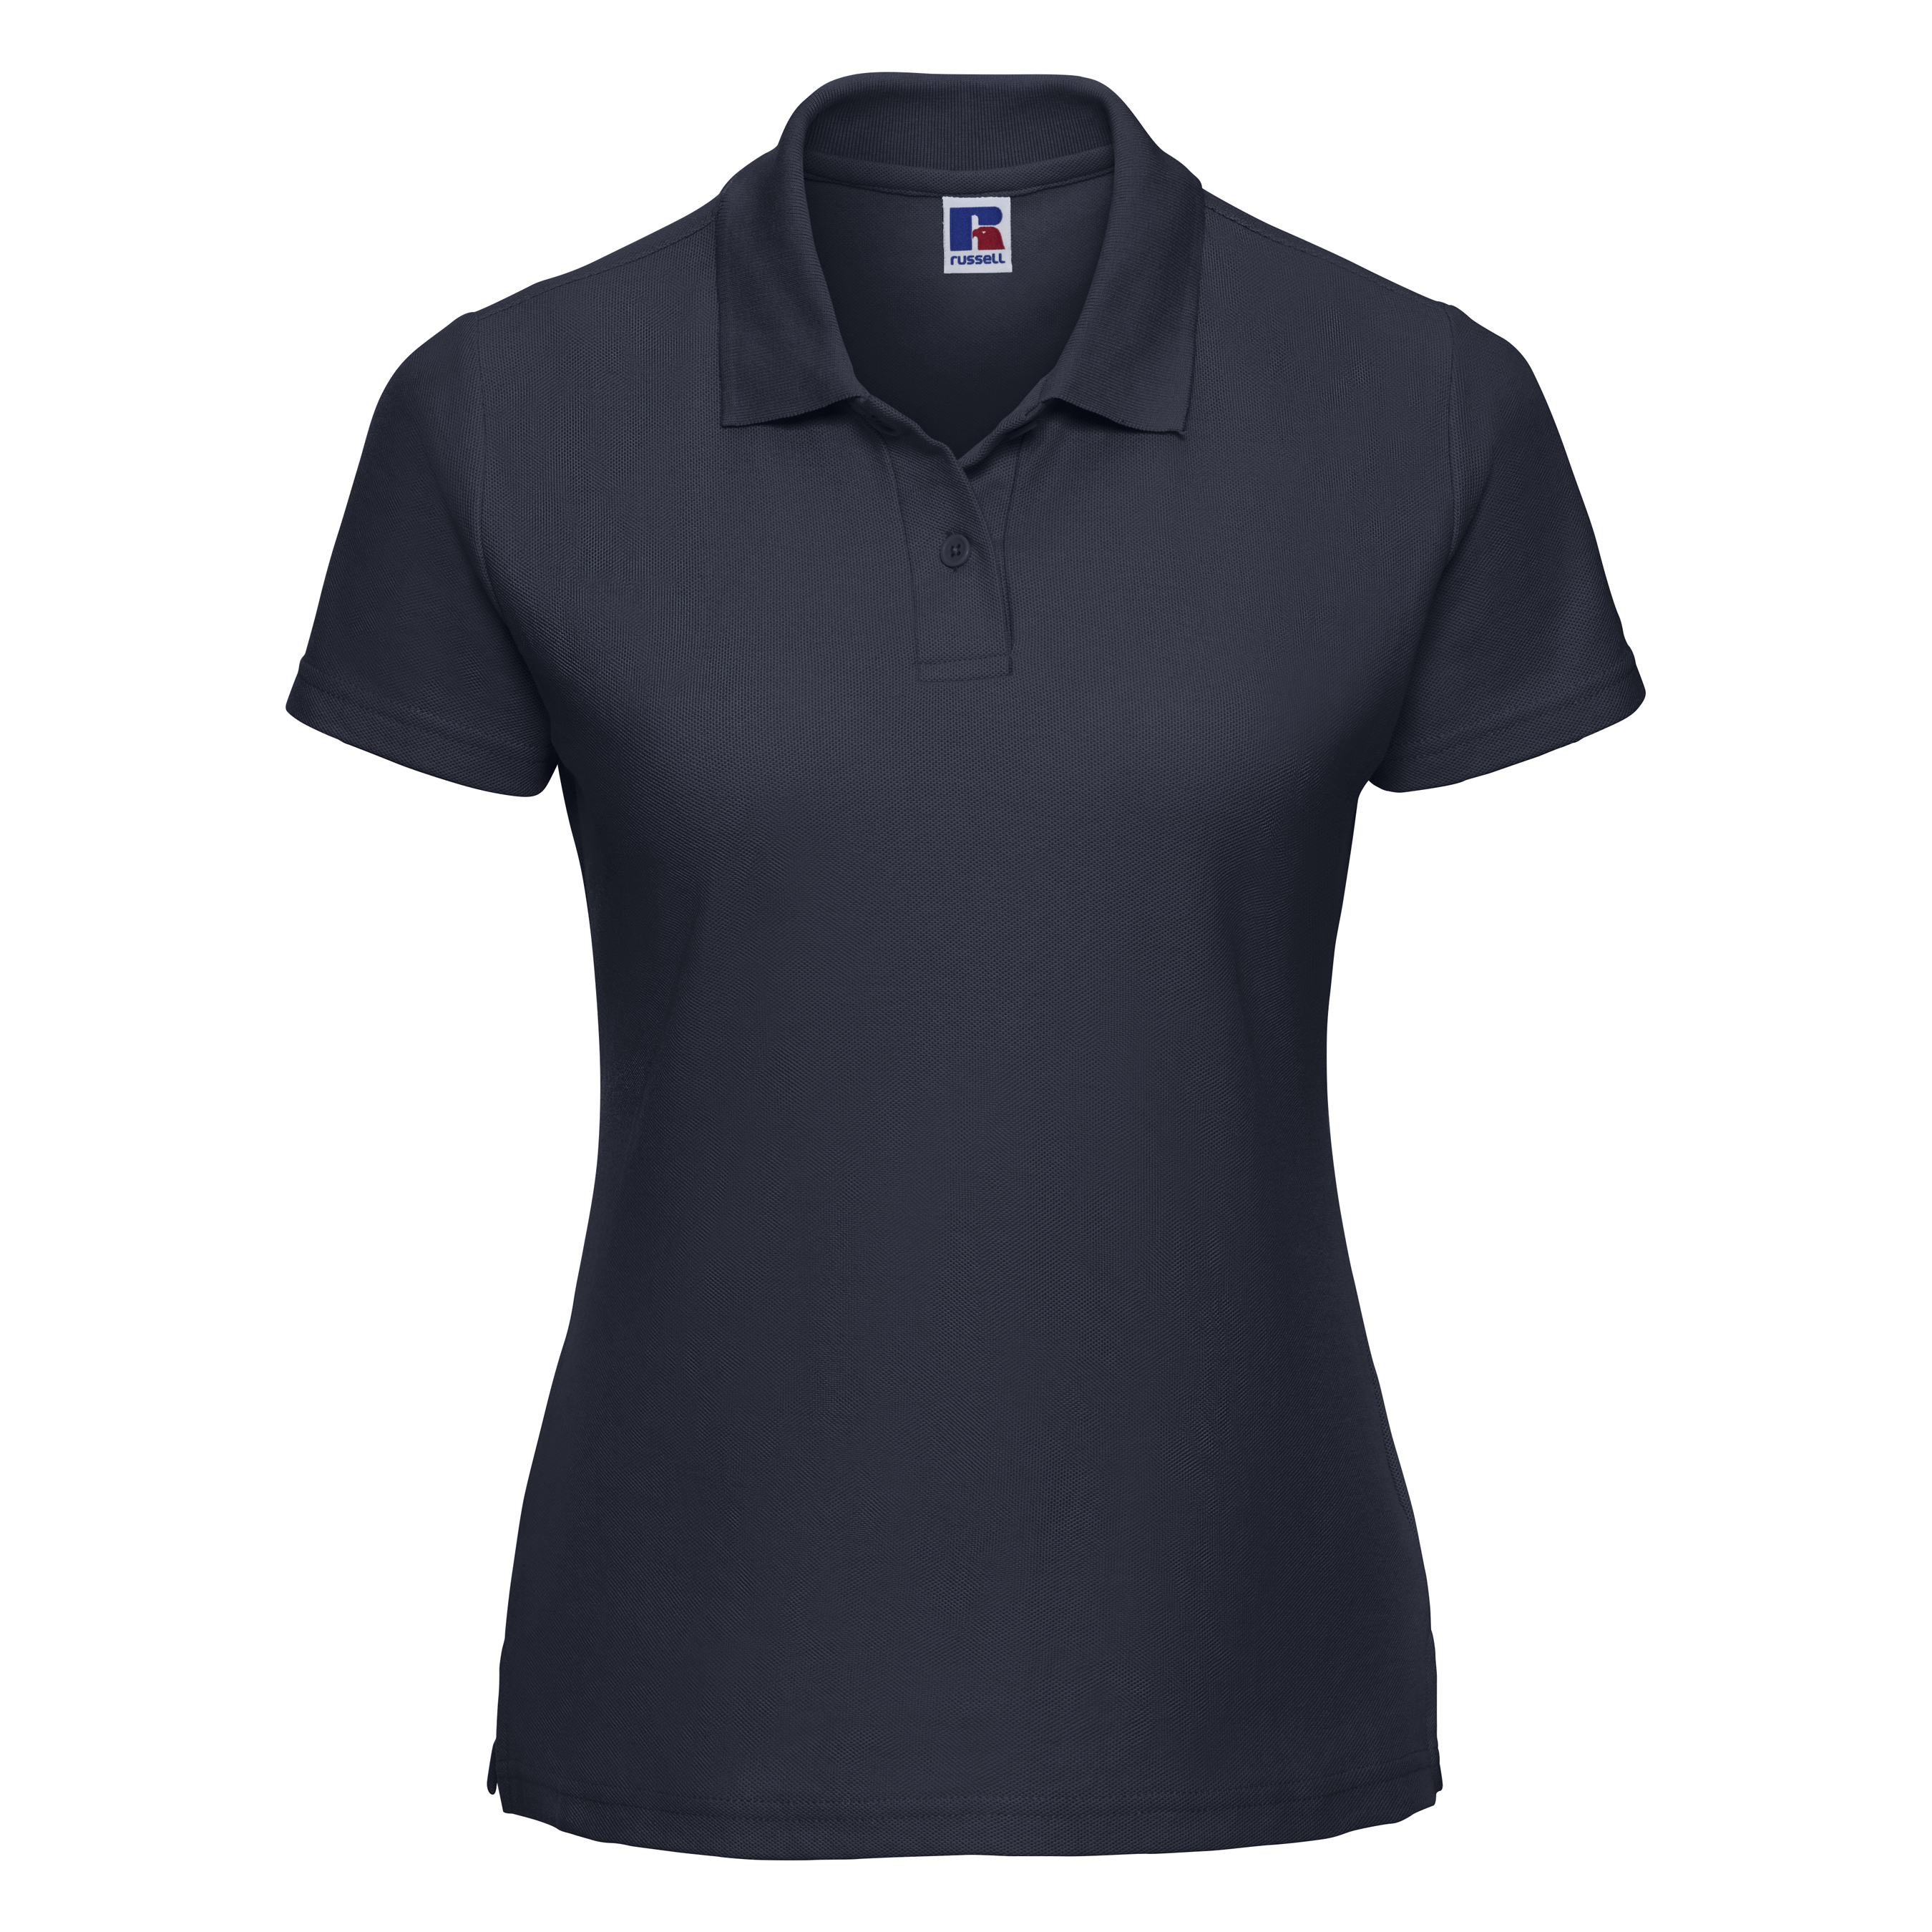 ax-httpswebsystems.s3.amazonaws.comtmp_for_downloadrussell-womens-polycotton-french-navy.jpg